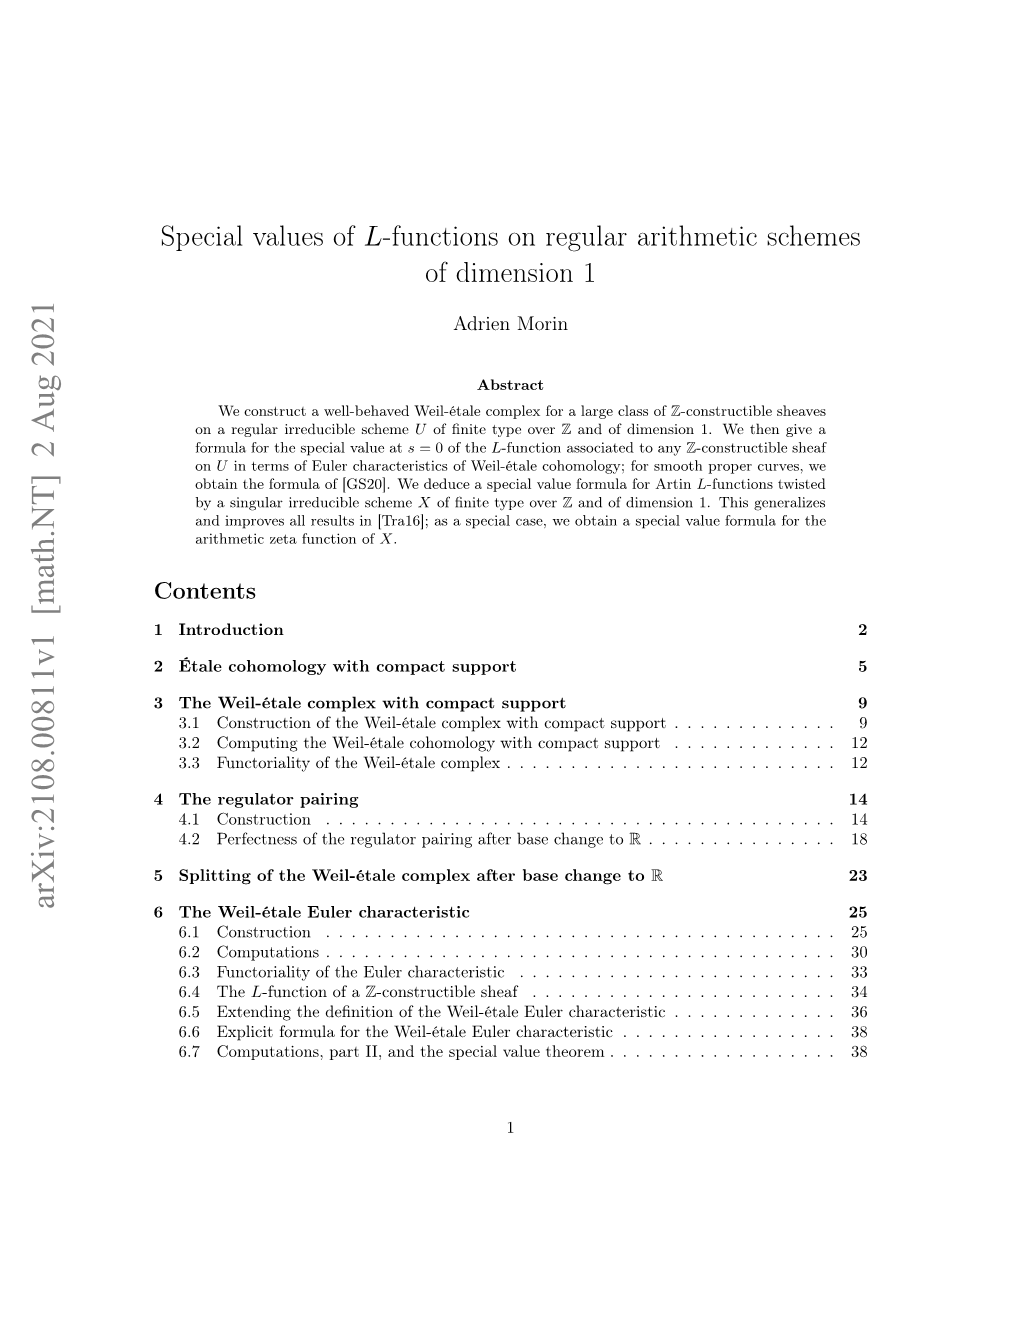 Special Values of $ L $-Functions on Regular Arithmetic Schemes Of